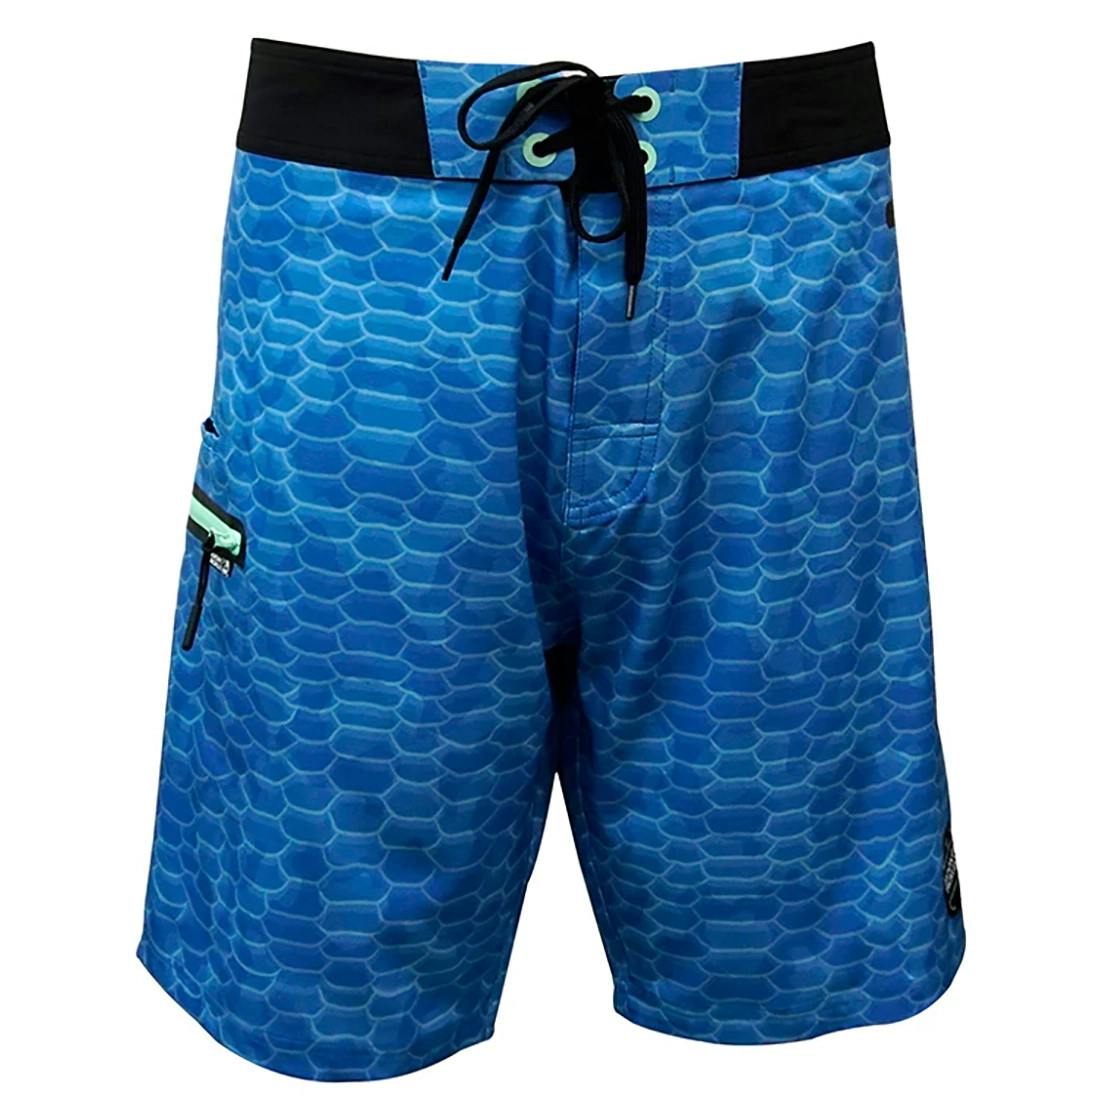 Hook & Tackle Fish Scales Boardshorts (Men's) Front - Blue Lagoon